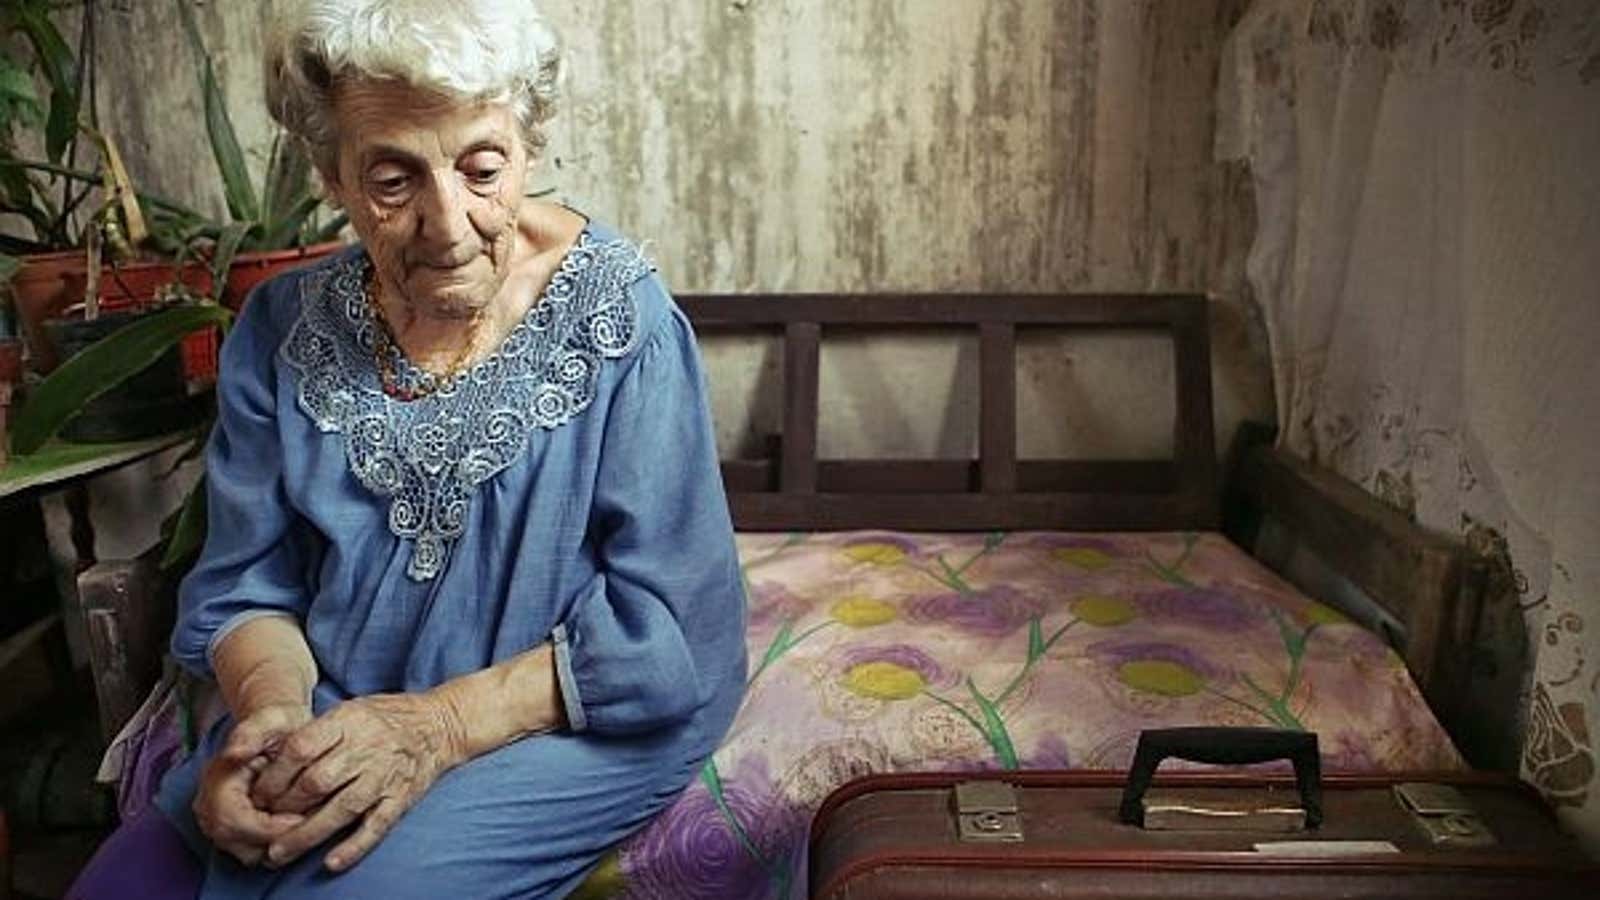 This apartment is all the Holocaust survivor Asia Komisarov could afford on her income of $675 a month.